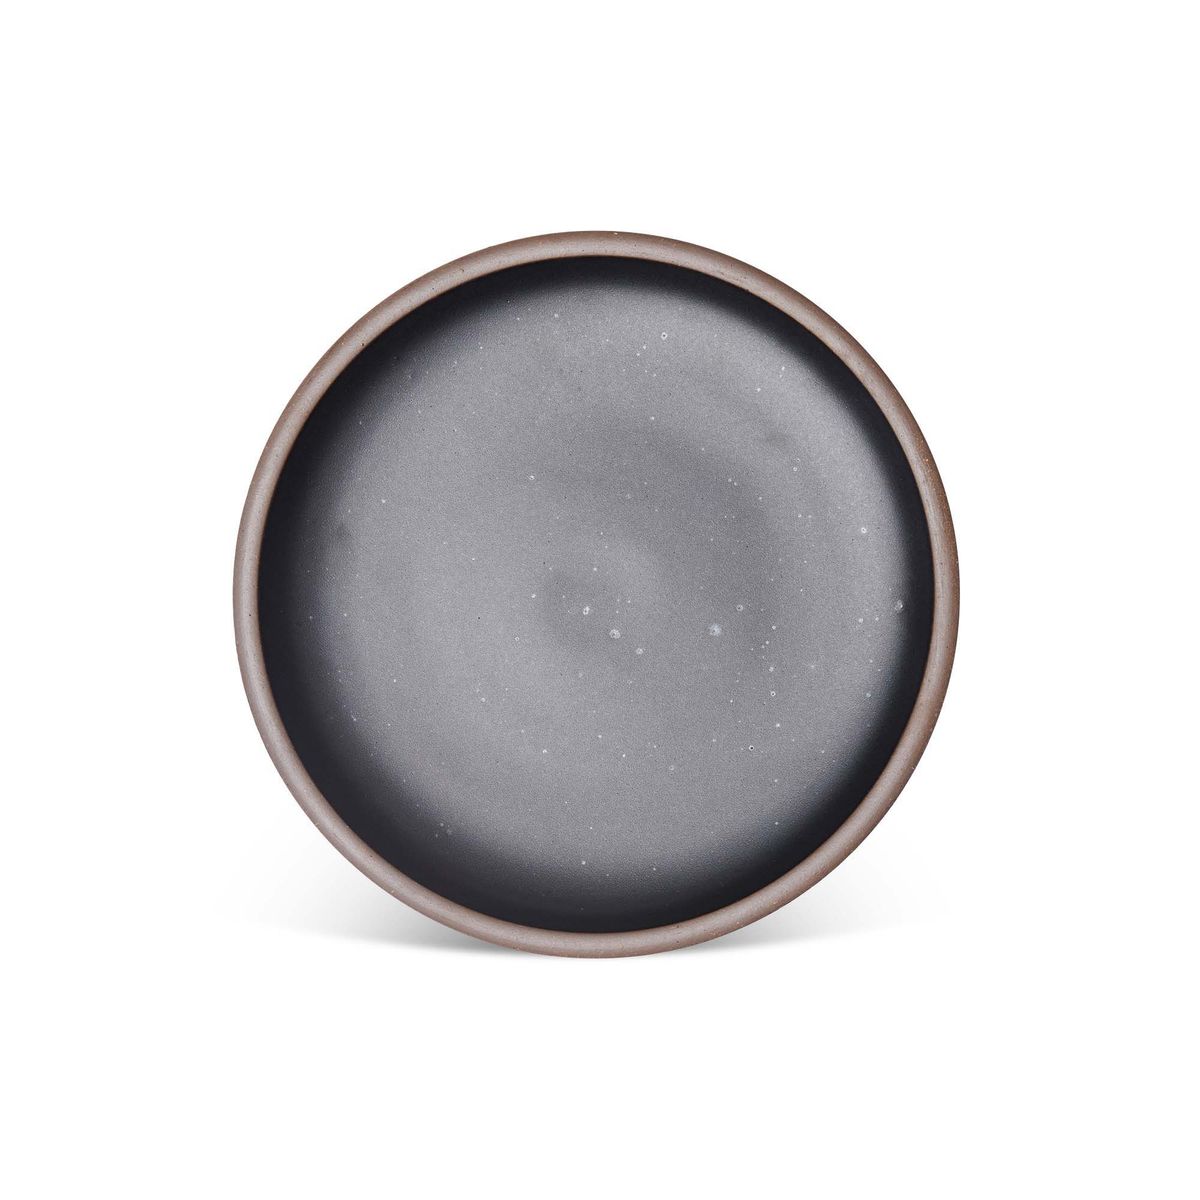 A dinner sized ceramic plate in a graphite black color featuring iron speckles and an unglazed rim.